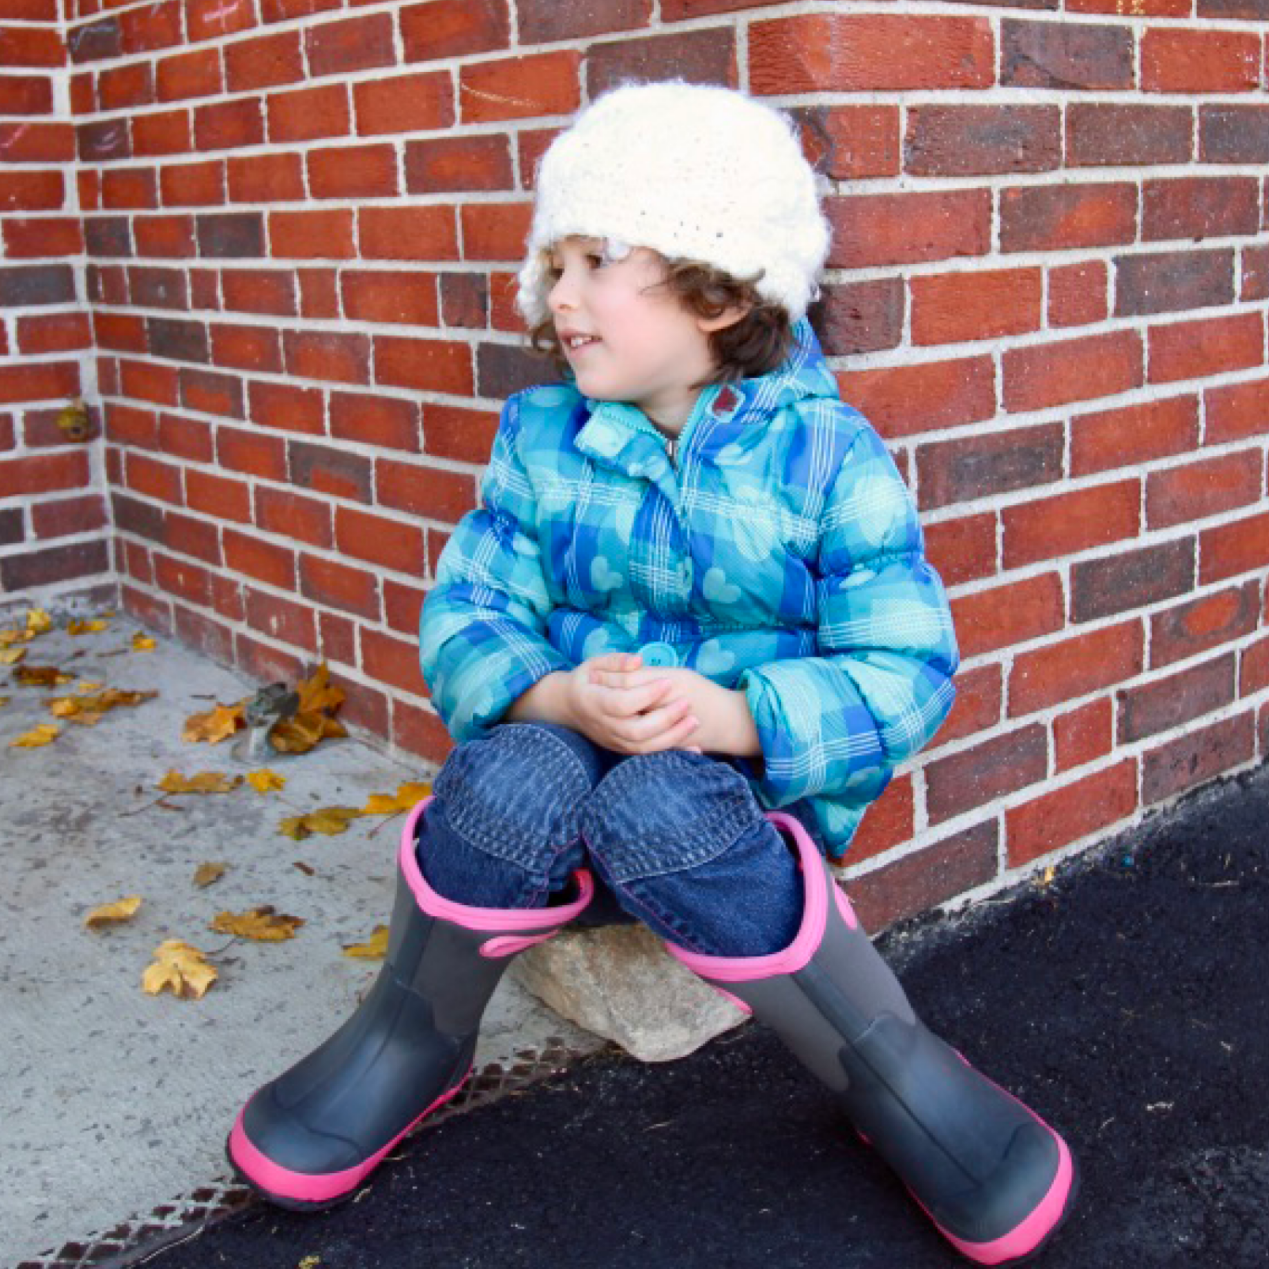 Girl sitting against brick building and wearing blue jacket, white hat, and black rain boots with pink trim